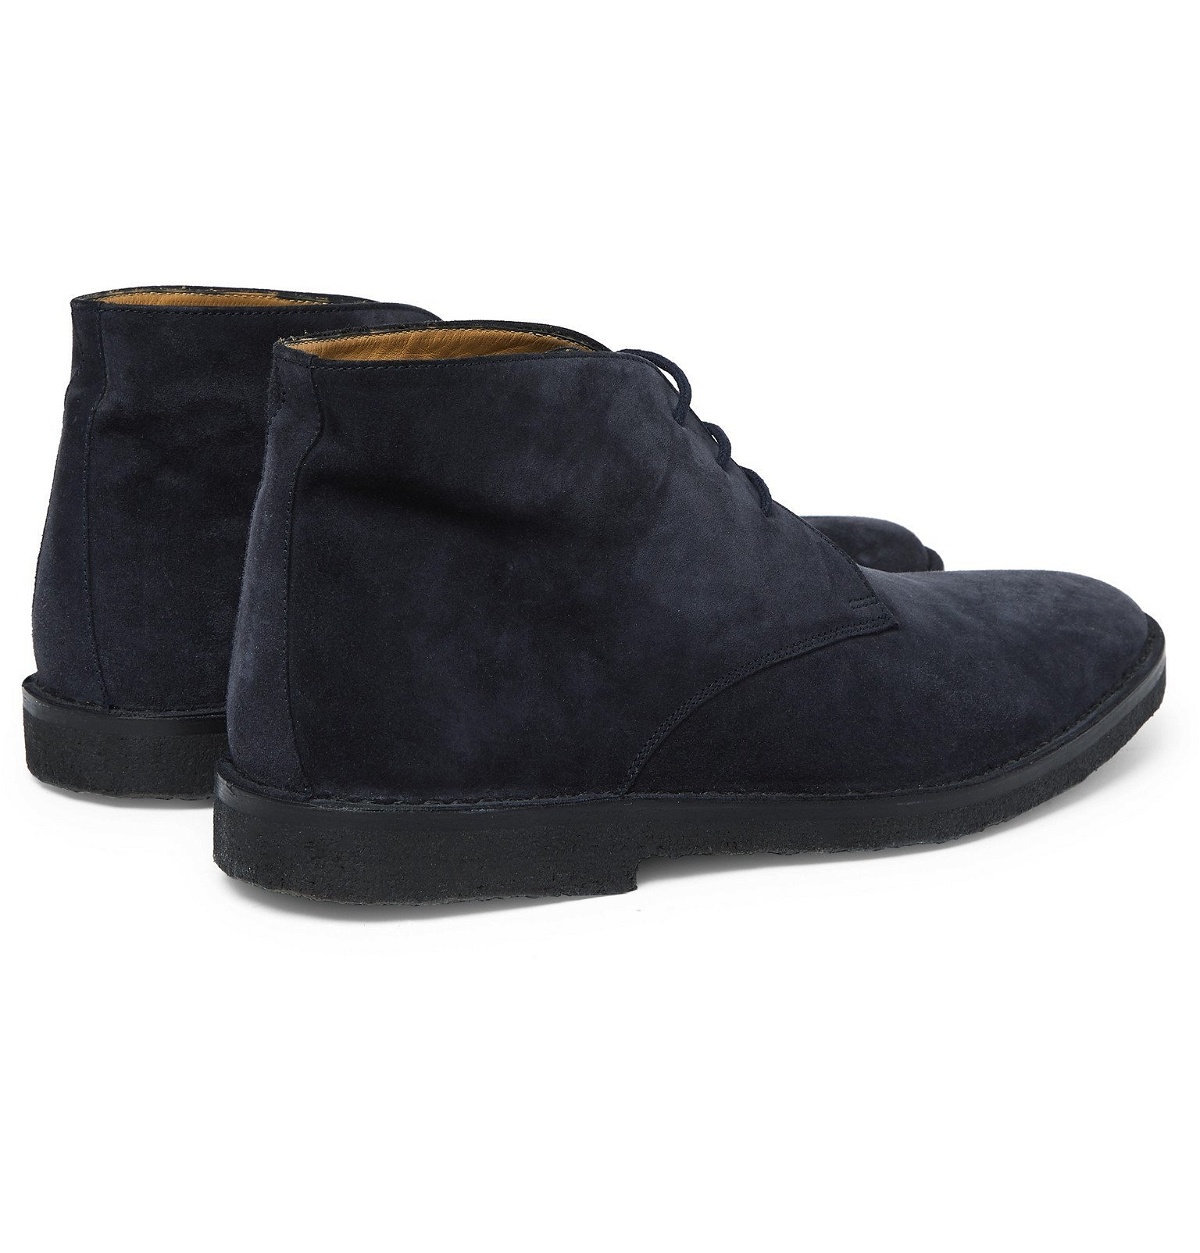 Connolly - Suede Desert Boots - Blue Connolly